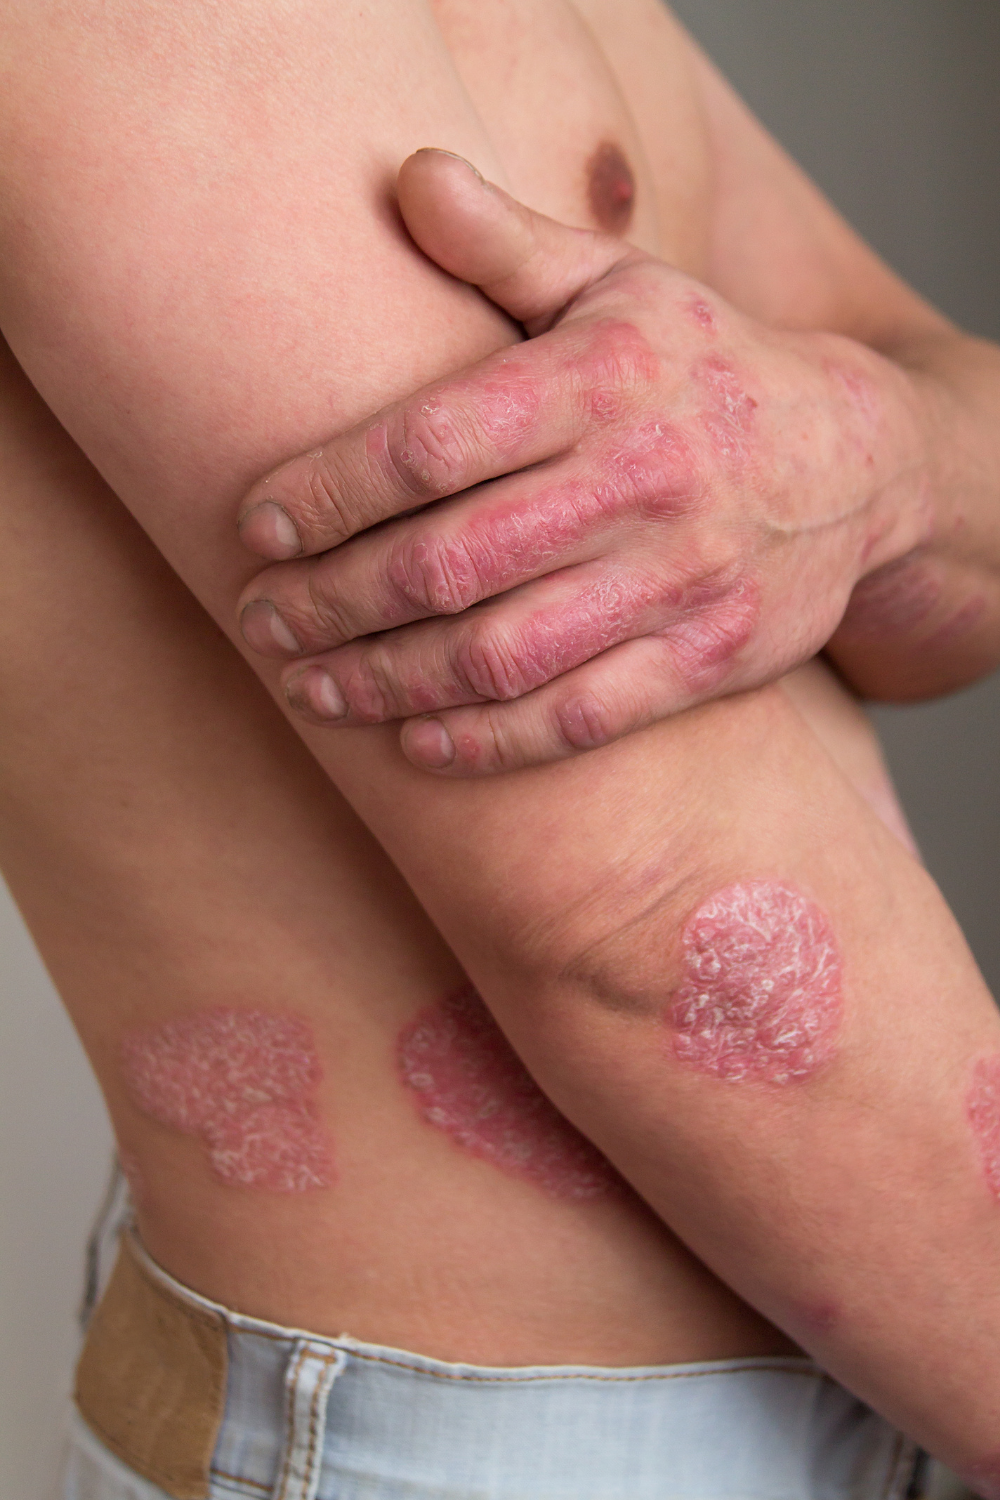 Home treatments for psoriasis; 5 effective remedies